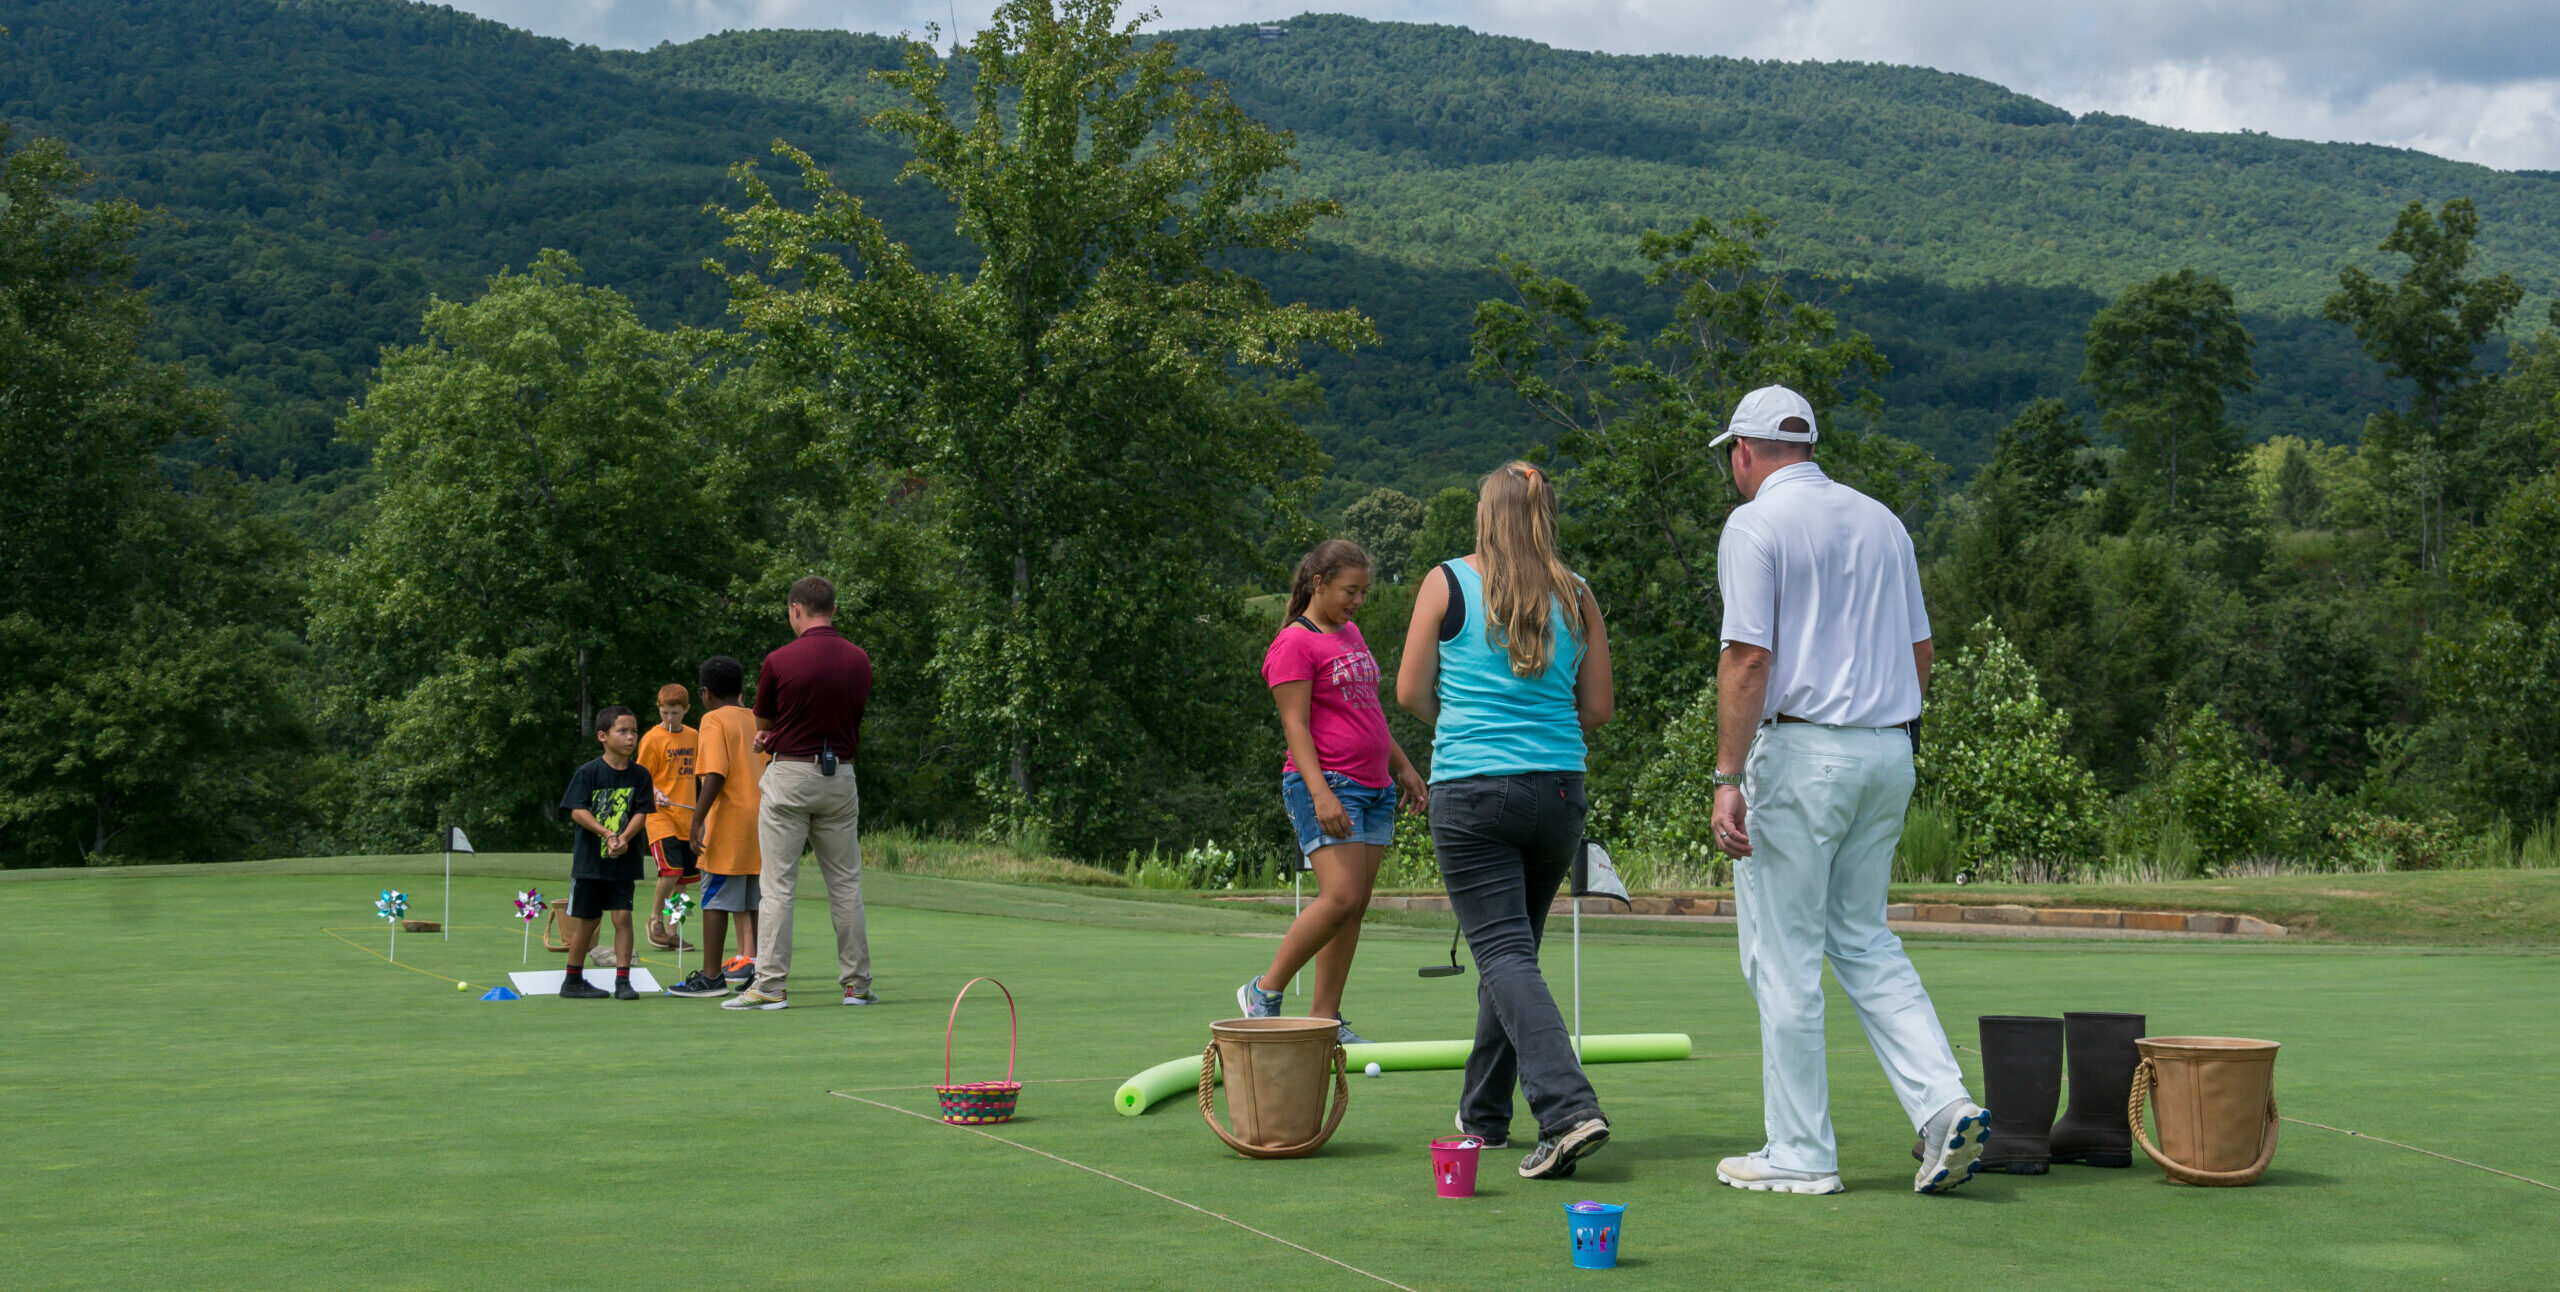 Golf lessons in the Blue Ridge Mountains at Bright's Creek Club at Mill Spring, NC